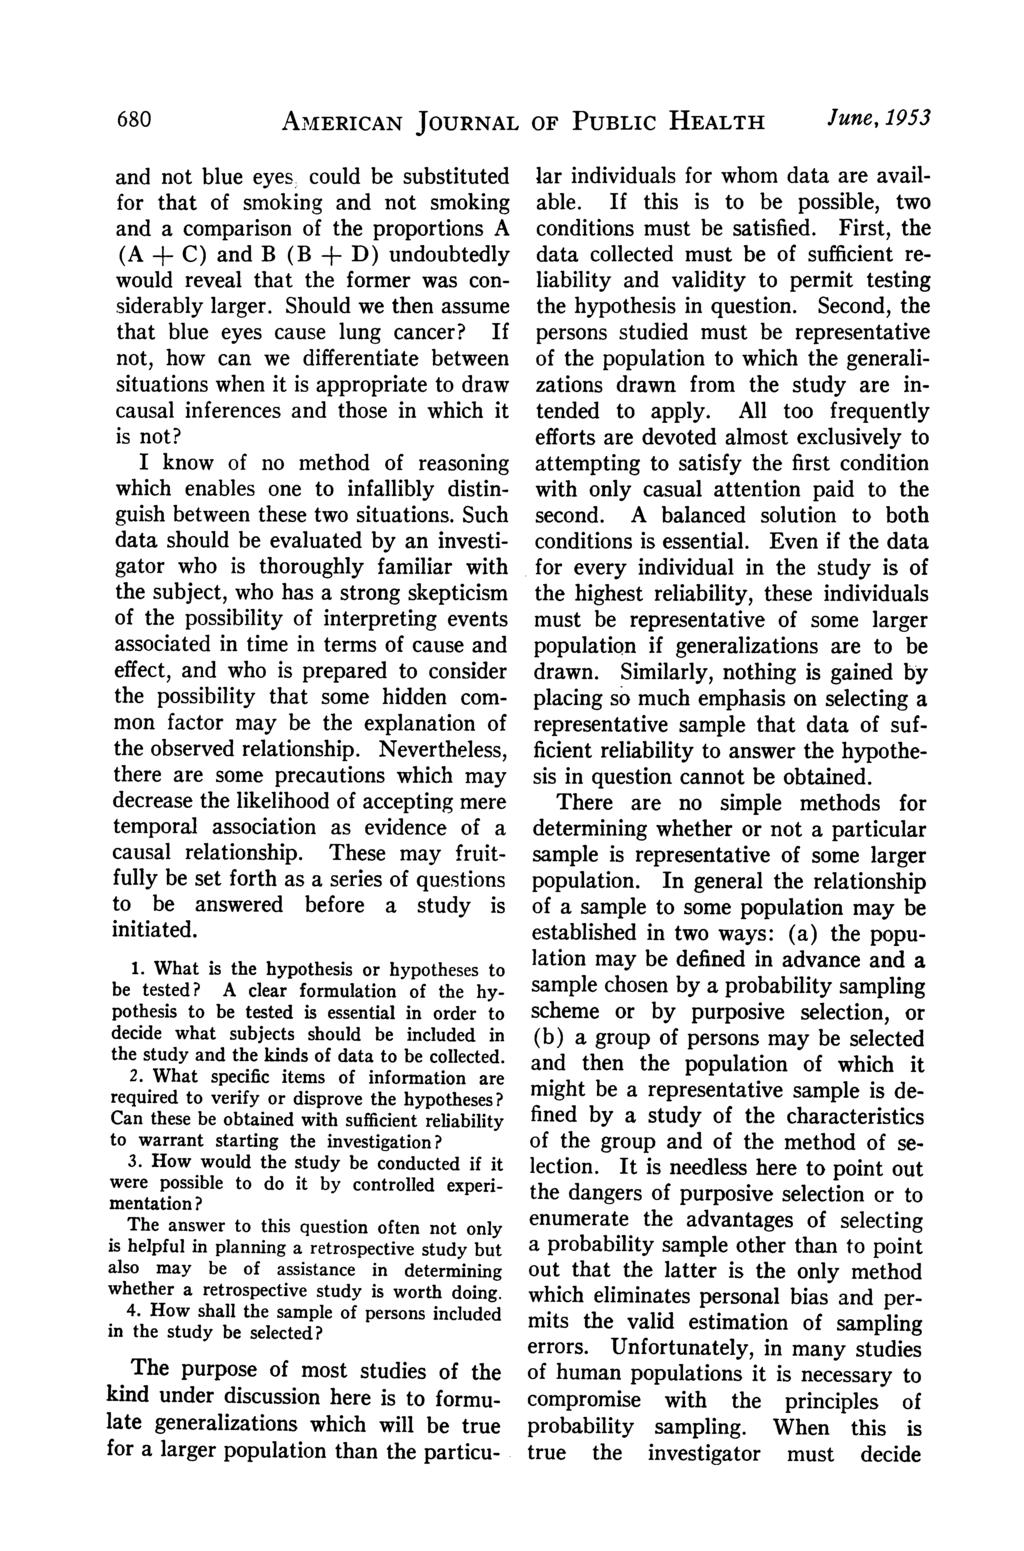 680 AMERICAN JOURNAL OF PUBLIC HEALTH June, 1953 and not blue eyes could be substituted for that of smoking and not smoking and a comparison of the proportions A (A + C) and B (B + D) undoubtedly